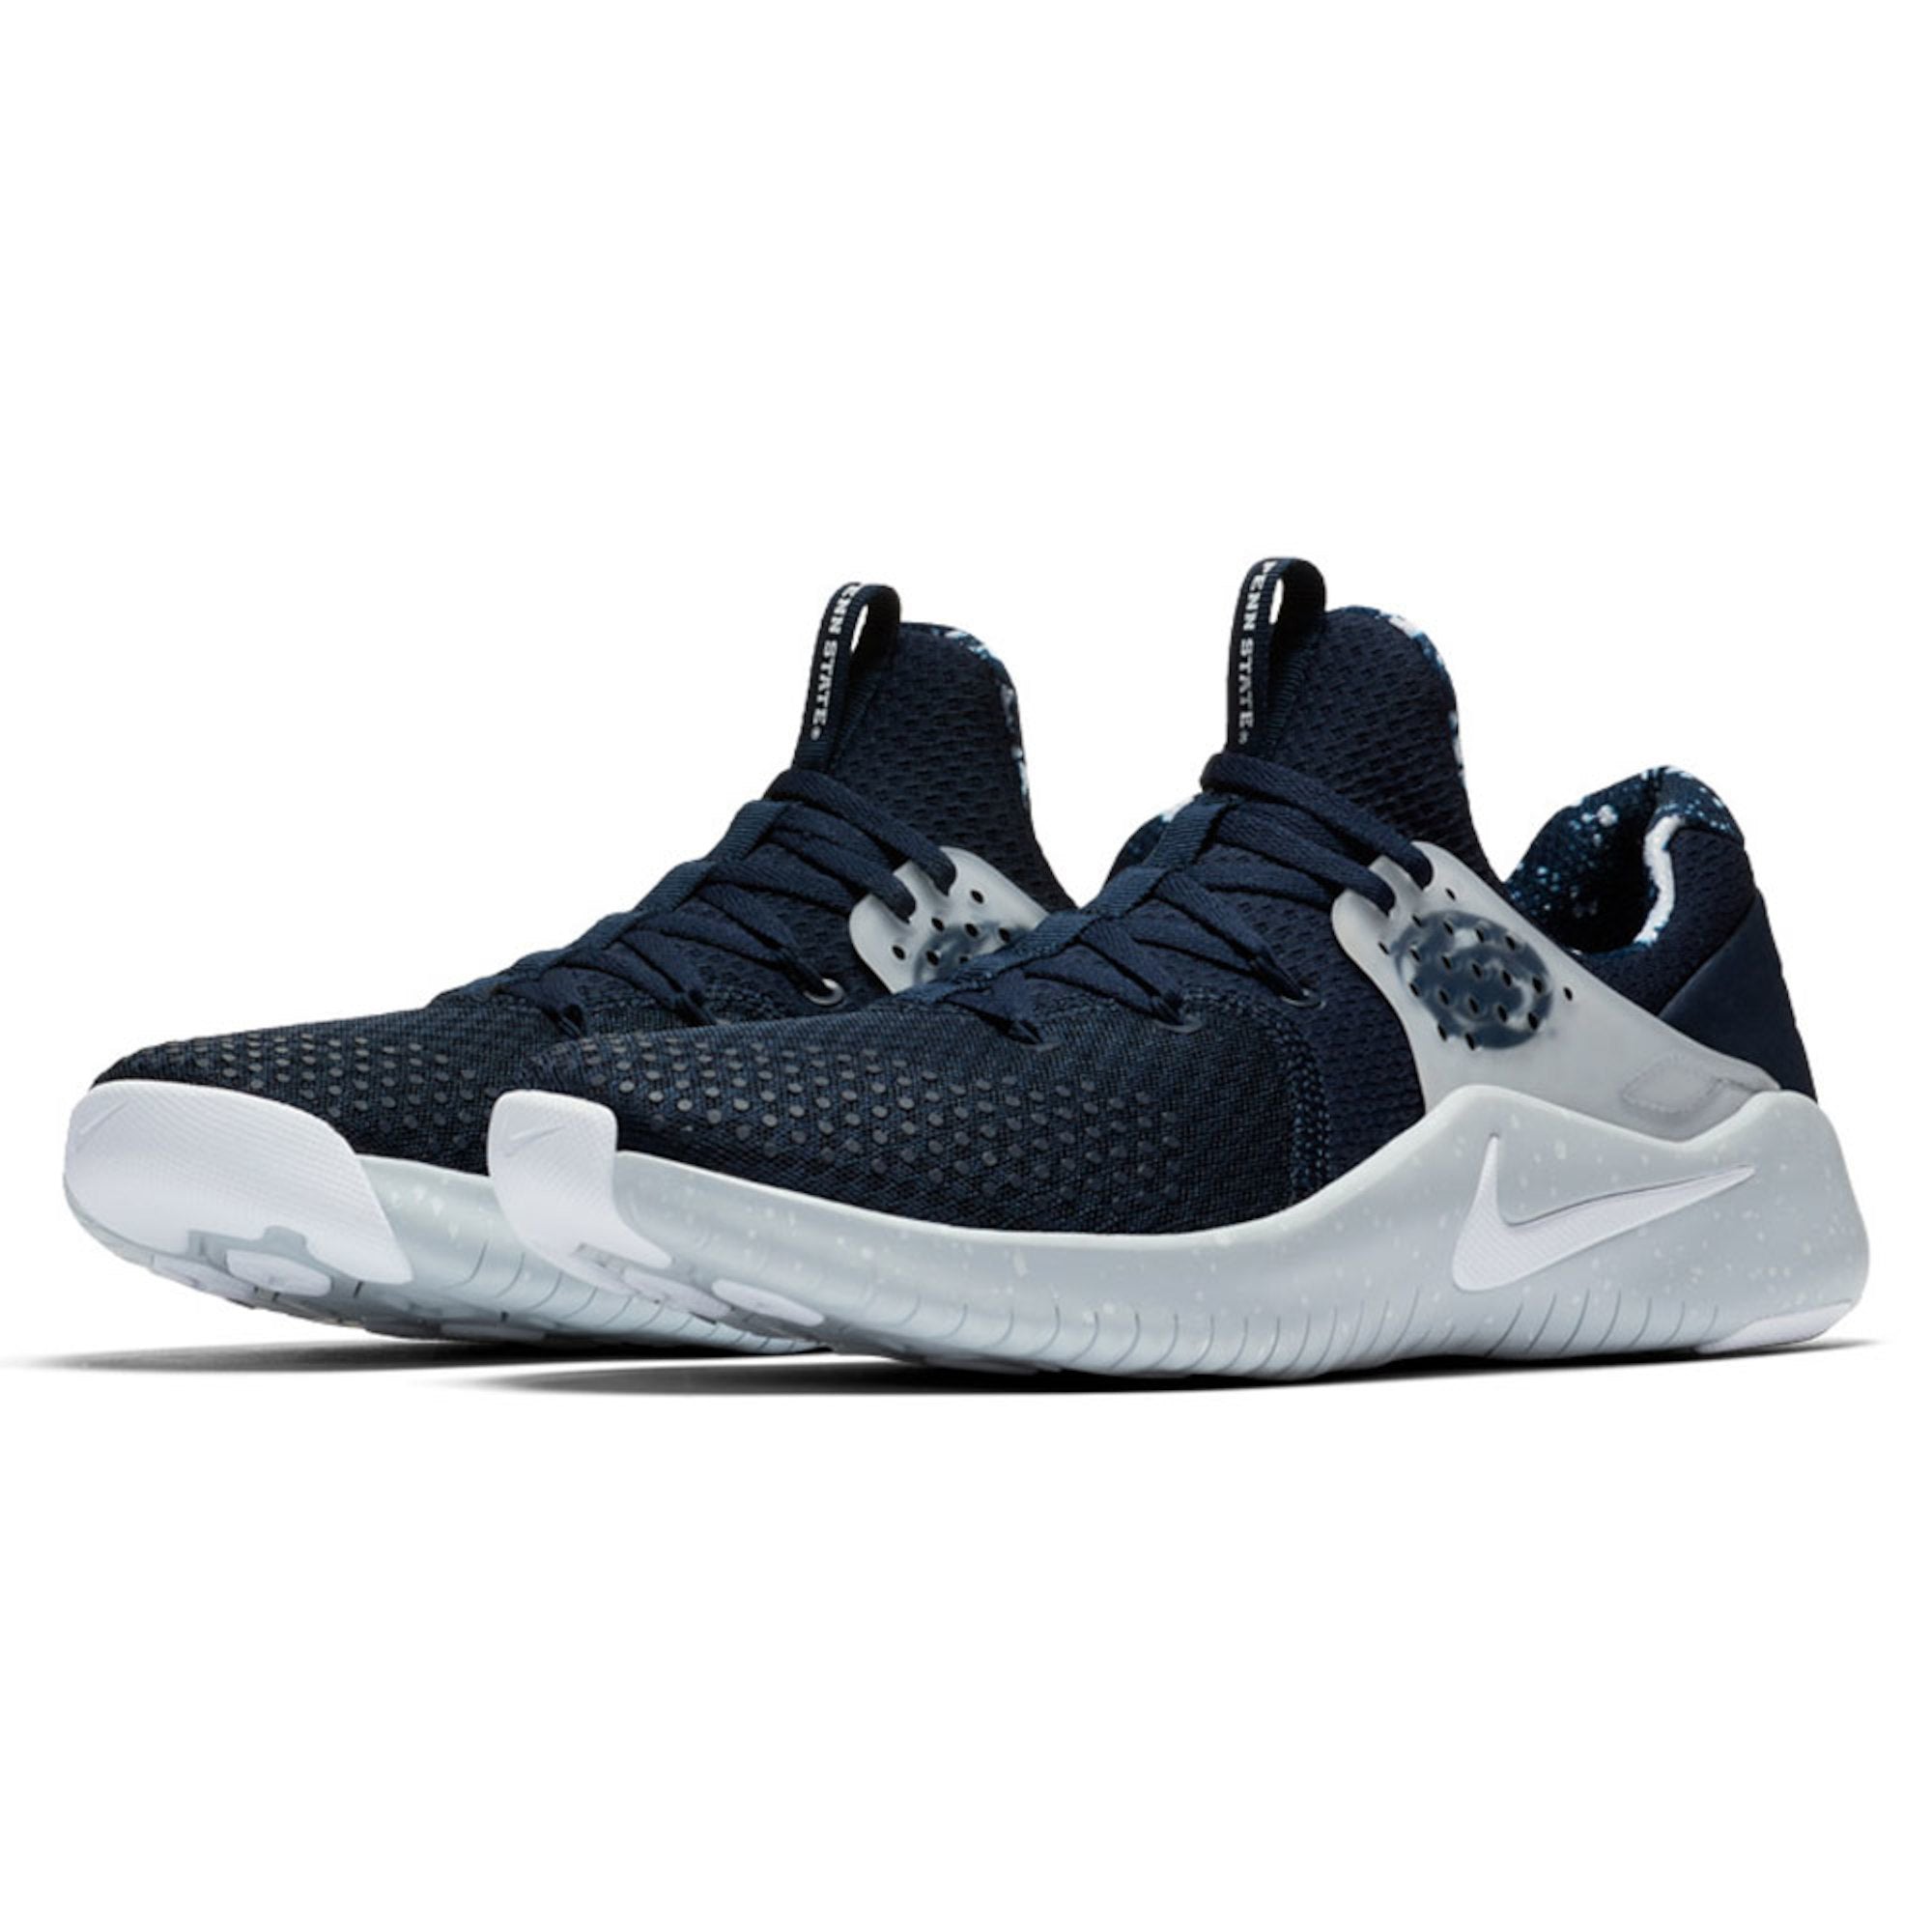 Penn State Nittany Lions Nike Free TR V8 Shoes Fan Shop TODAY